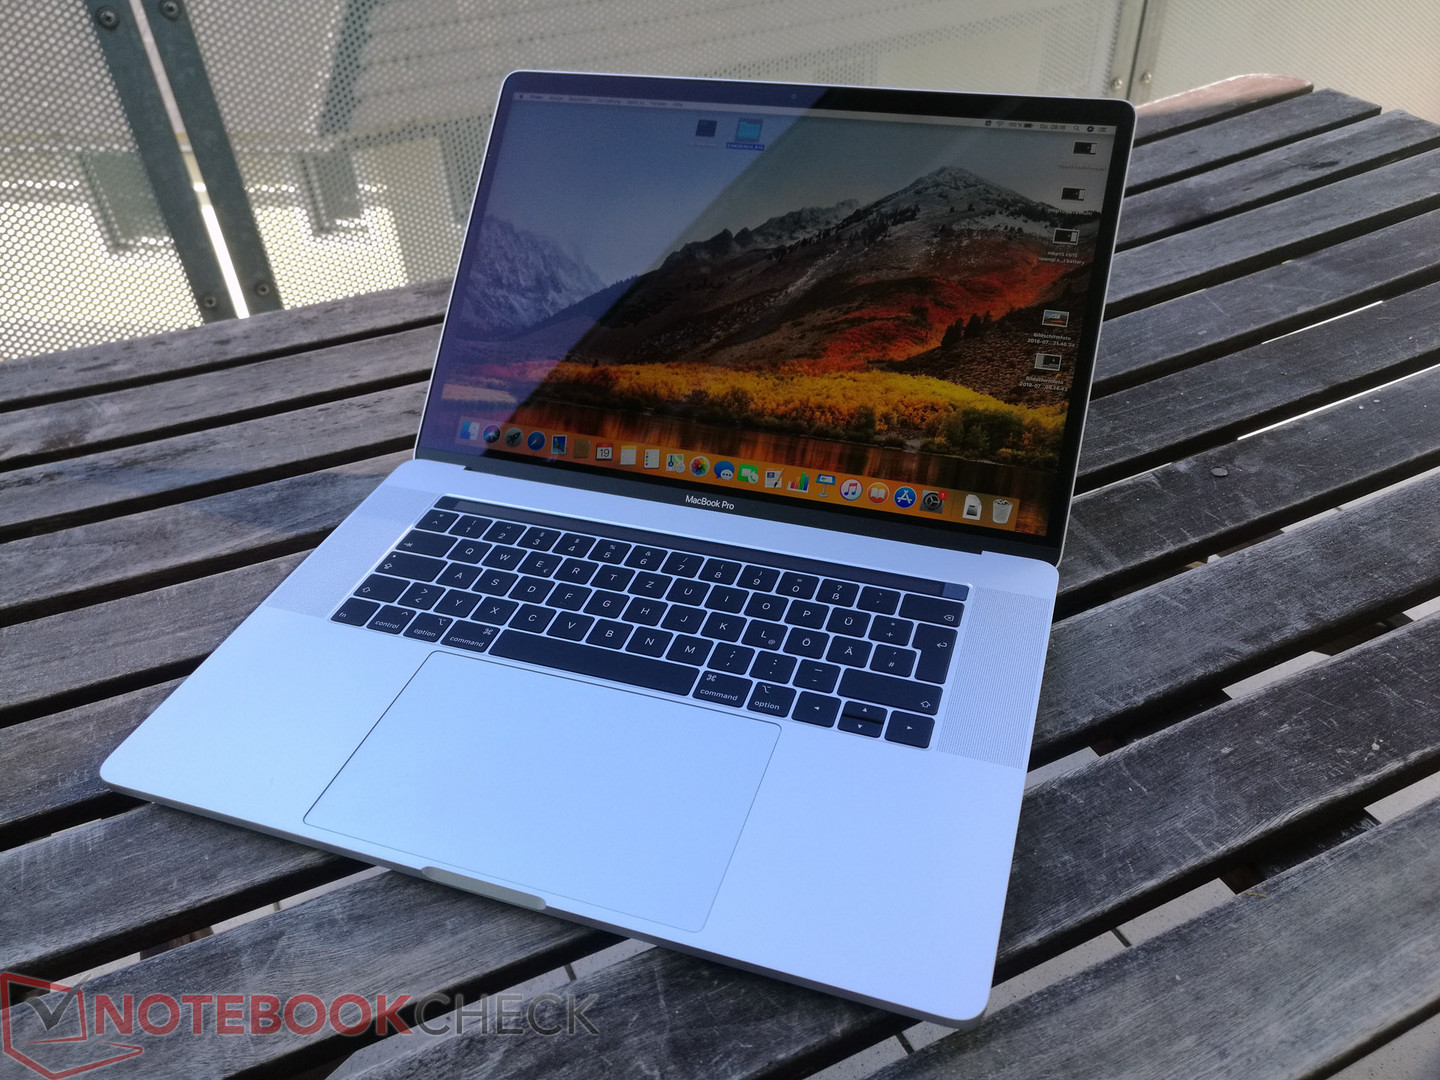 Apple May Be Factory Undervolting 2019 Macbook Pro 15 To Help With